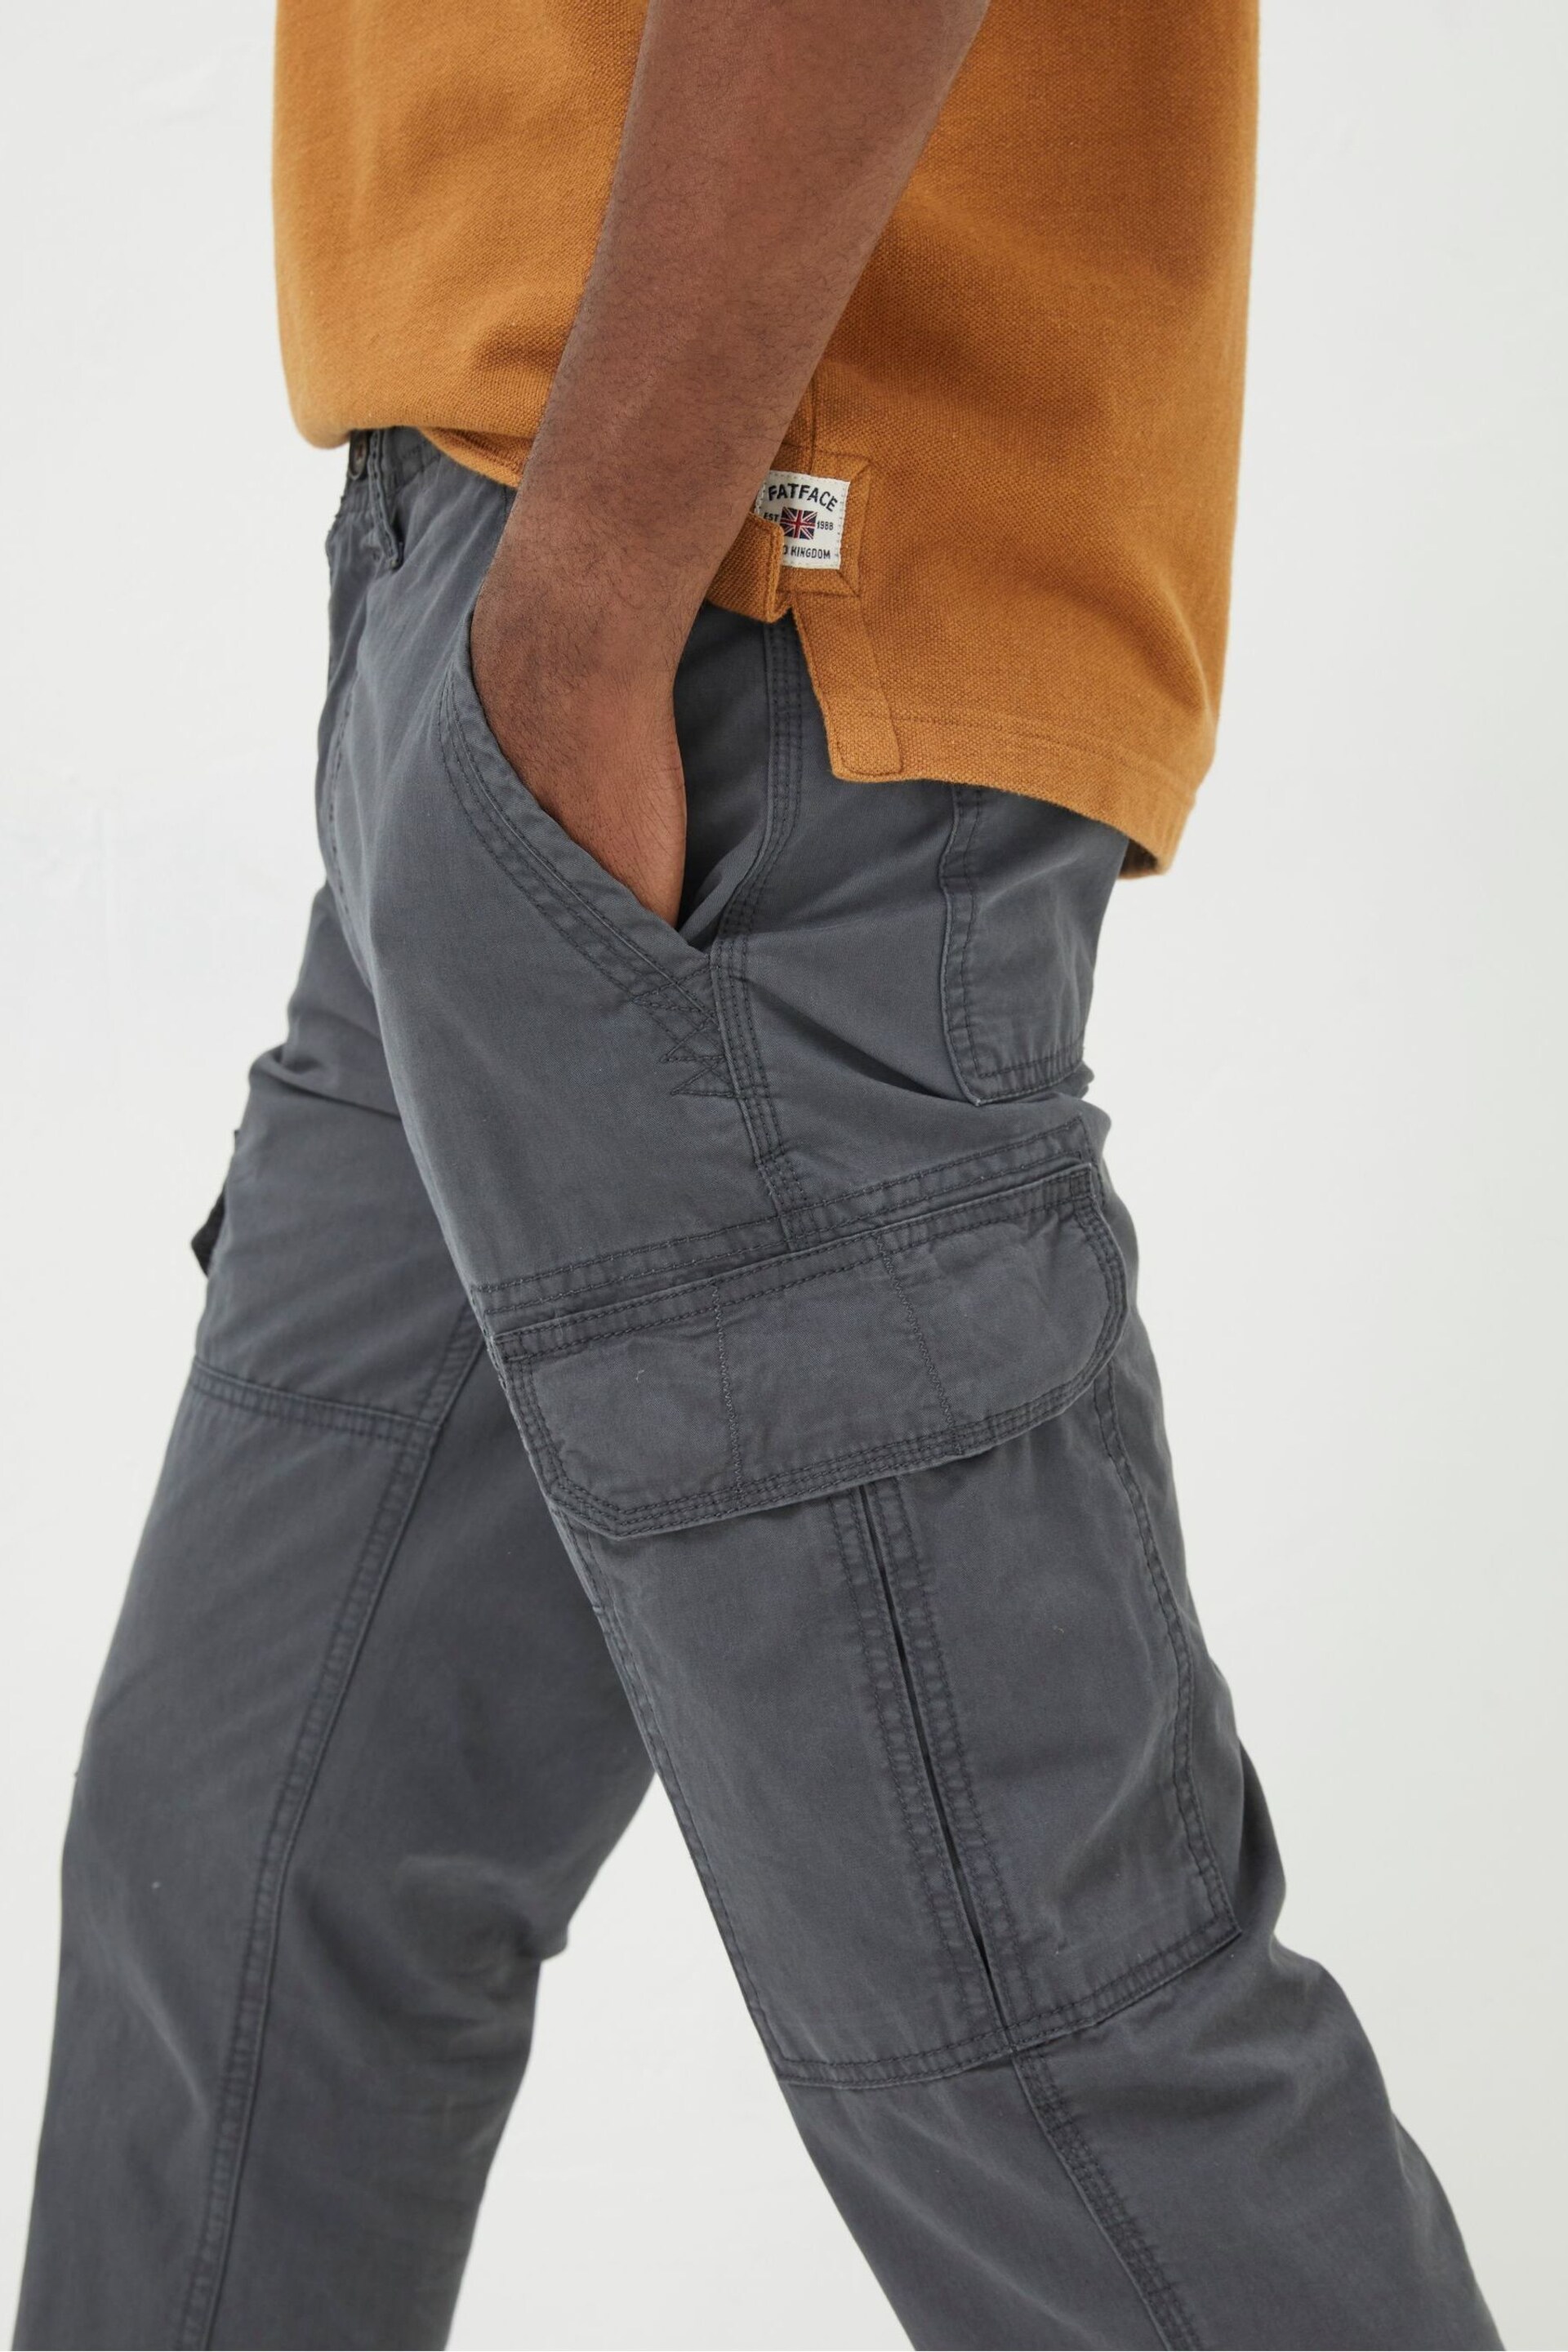 FatFace Grey Corby Ripstop Cargo Trousers - Image 4 of 5